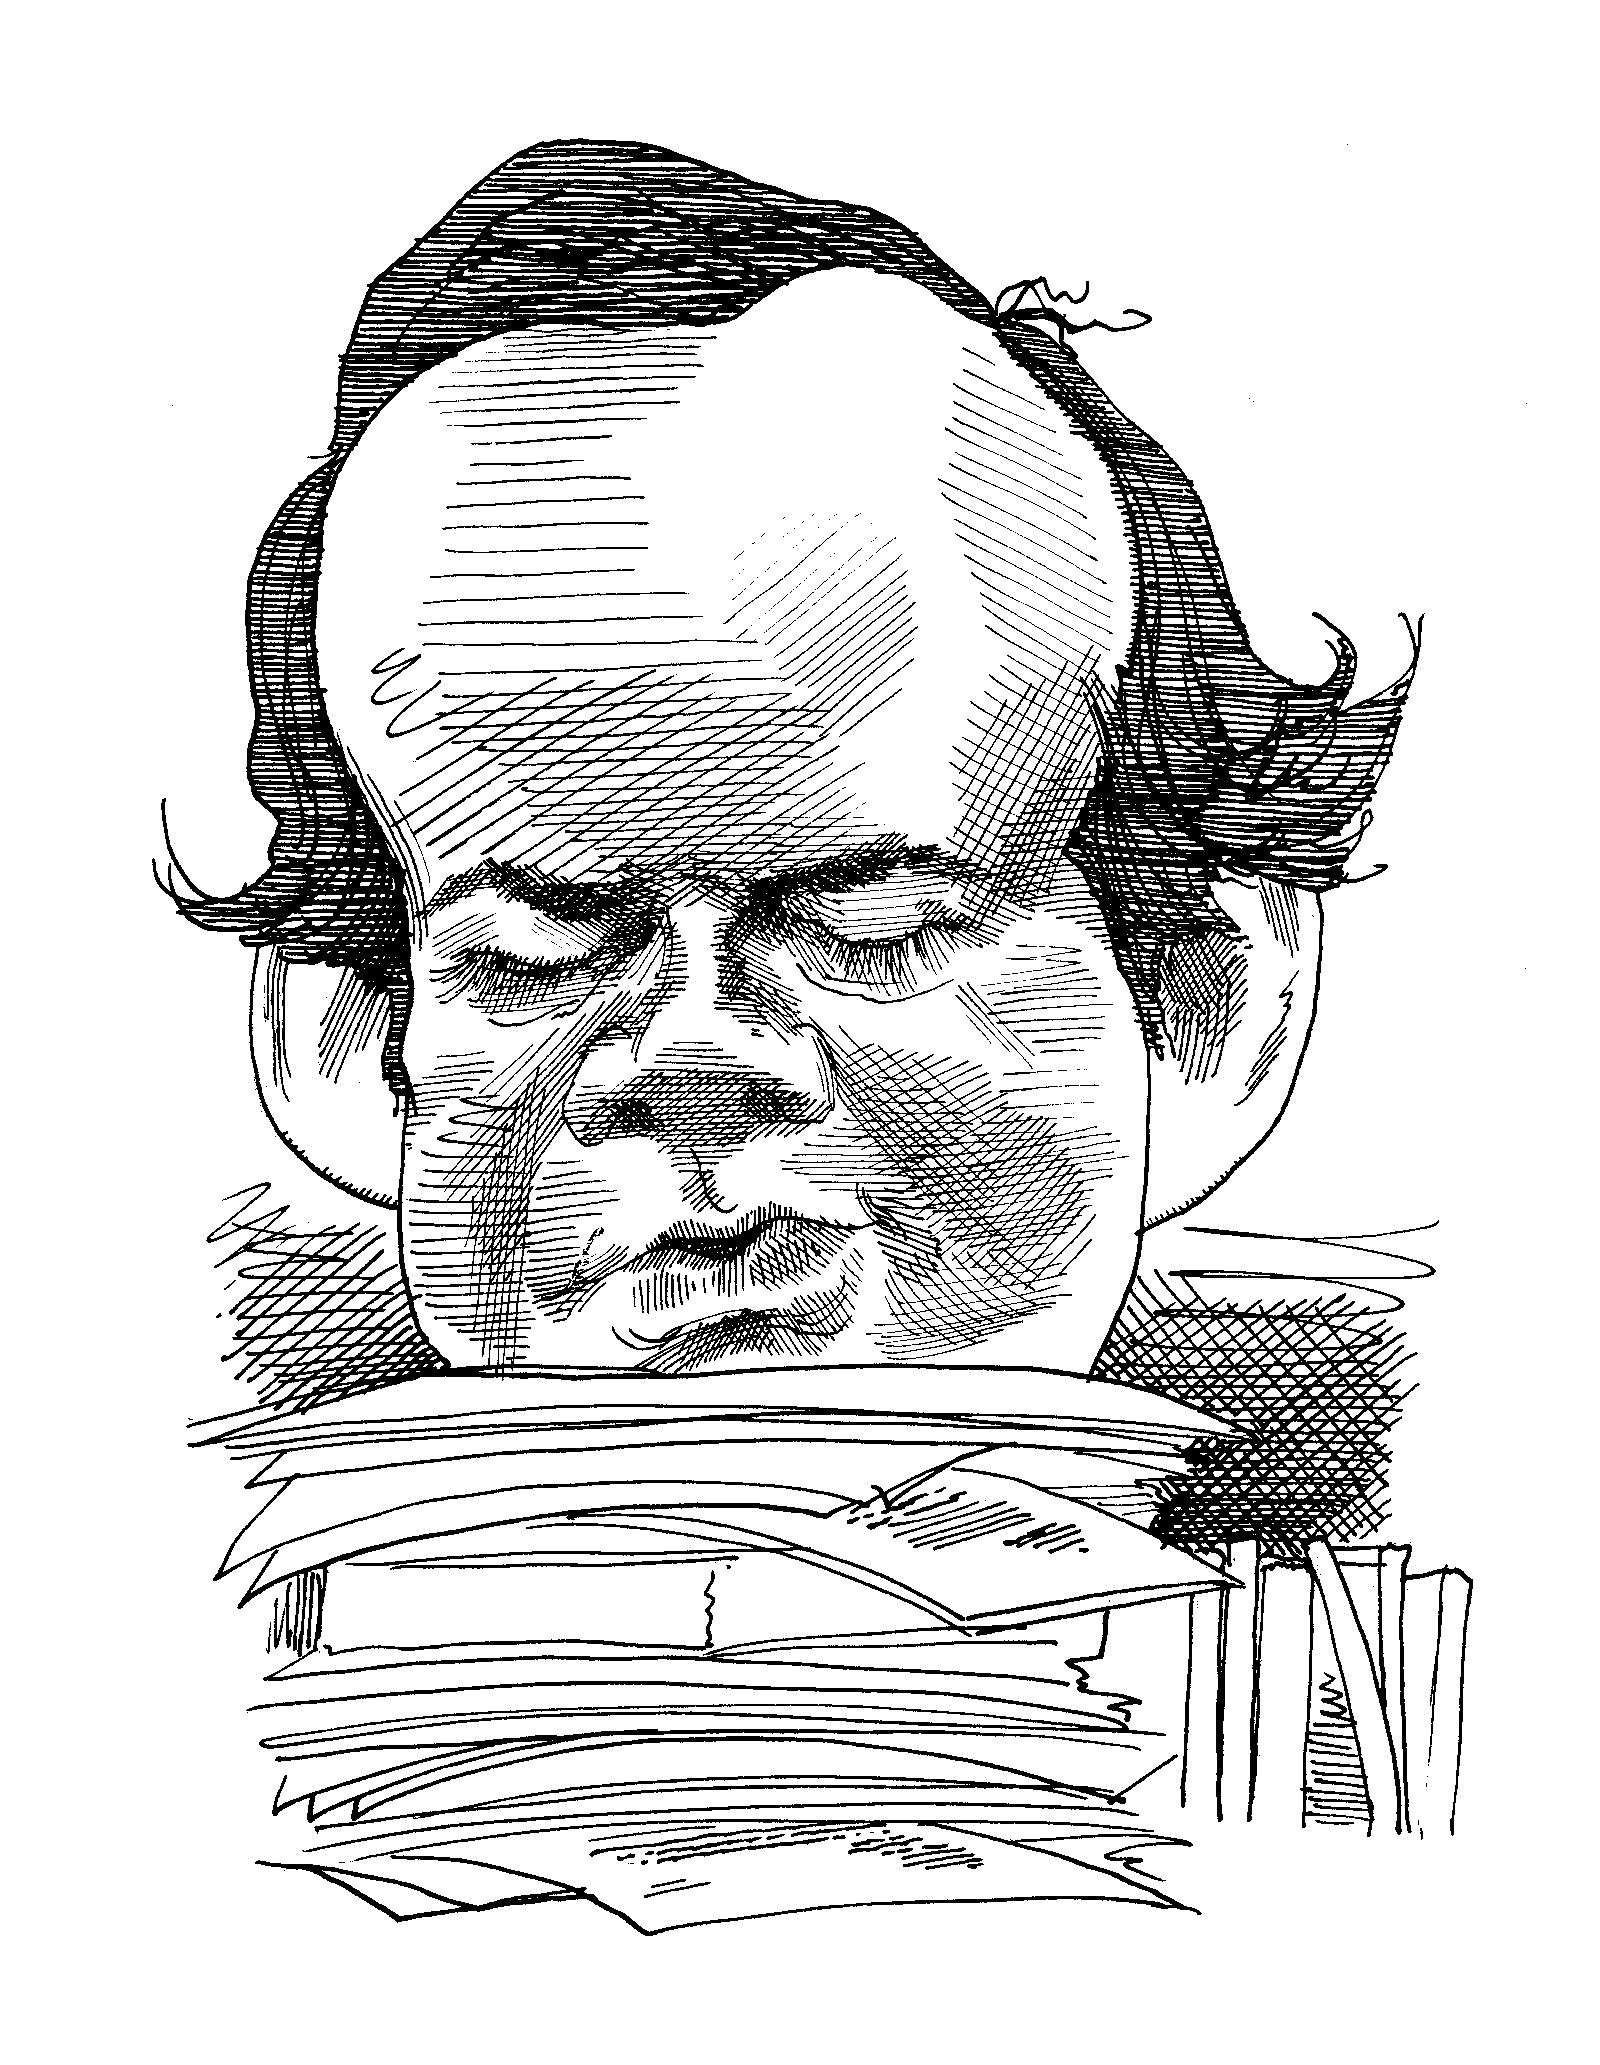 Robert Silvers; drawing by David Levine